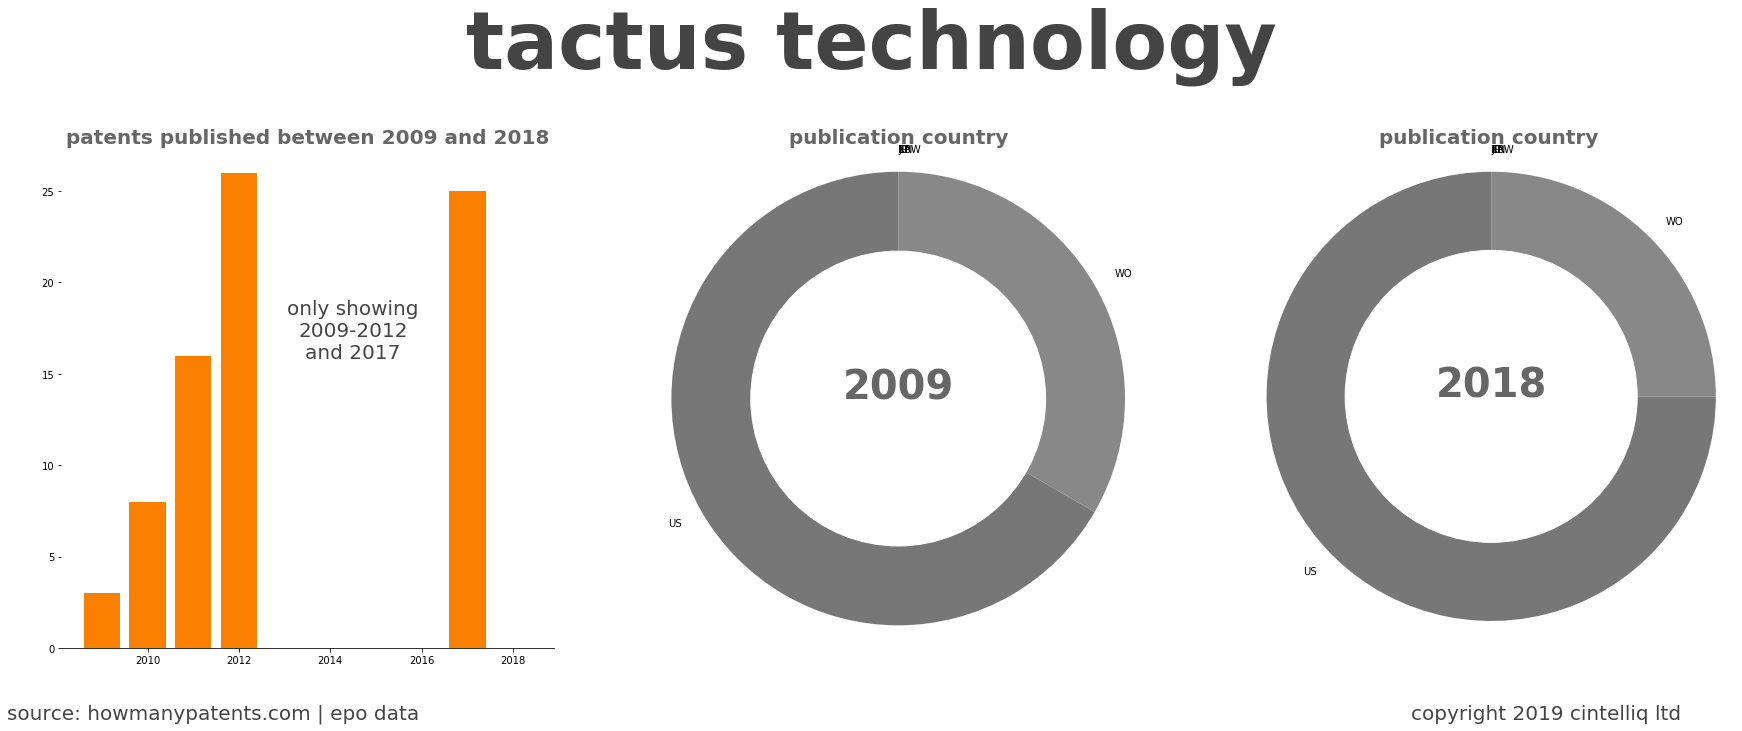 summary of patents for Tactus Technology